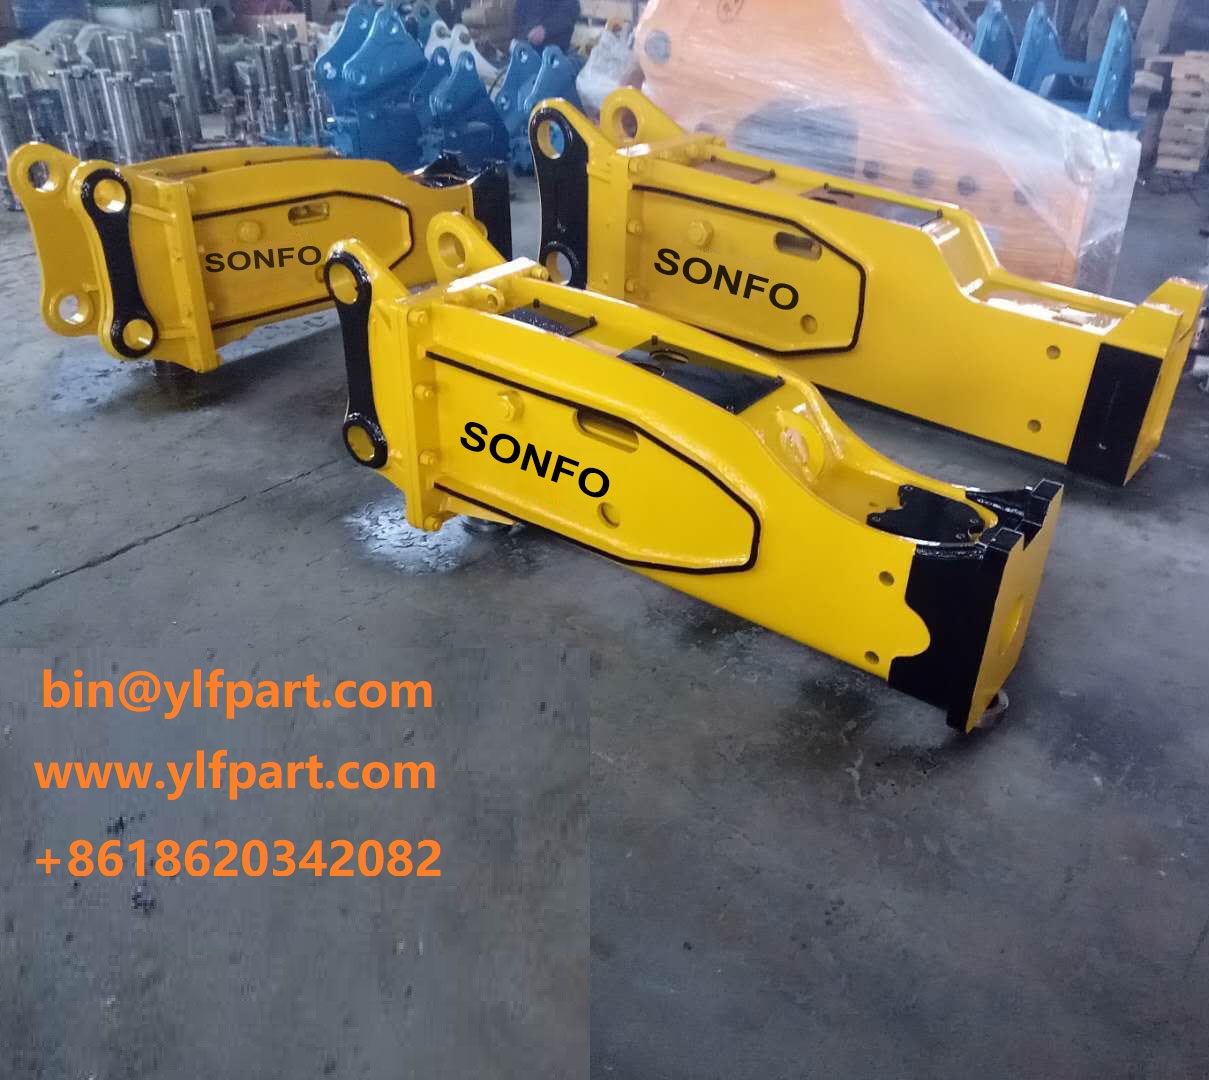 Different types of backhoes bobcat mini demolition excavator attachment side type hydraulic jack hammer 